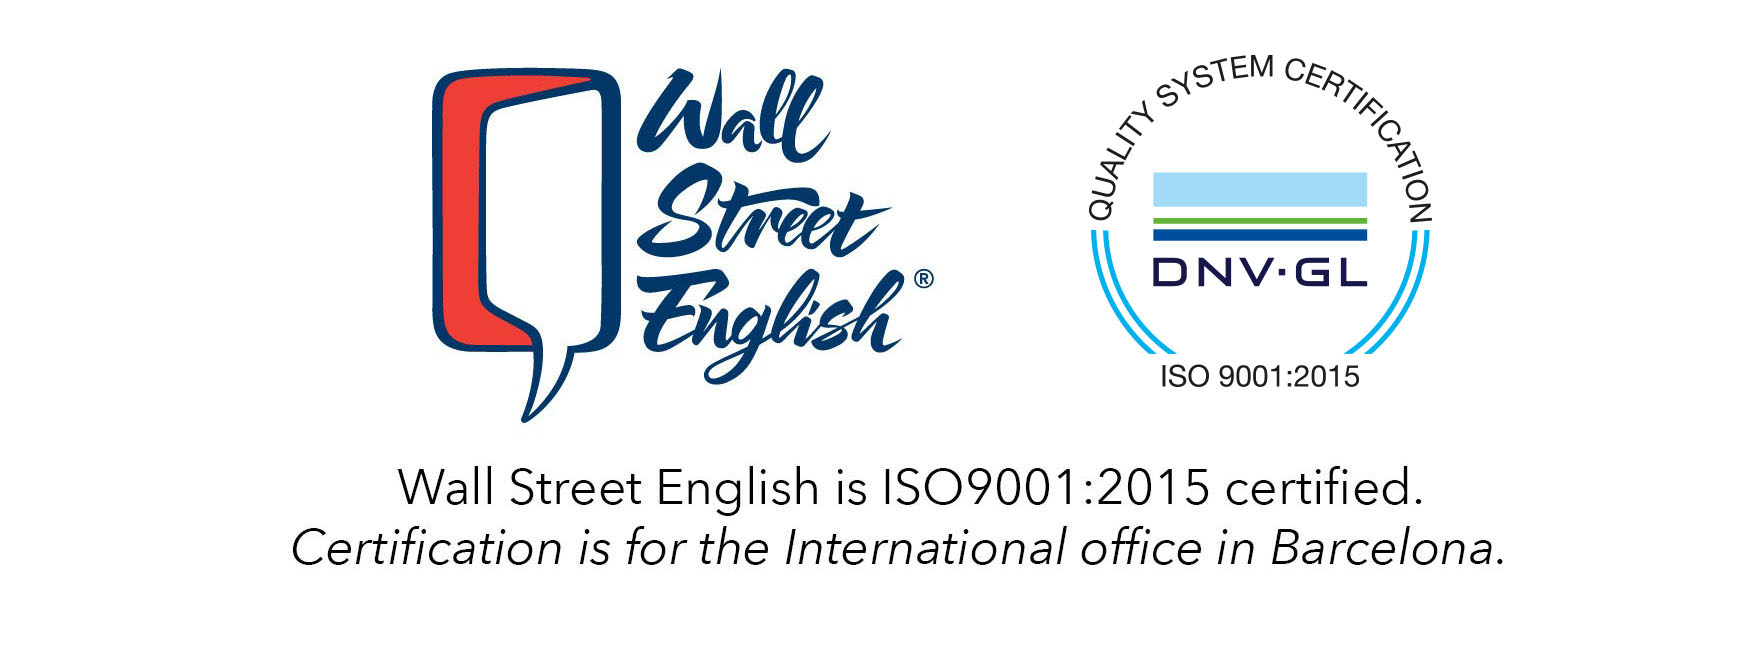 Wall Street English is ISO9001:2015 certified. Certification is for the International office in Barcelona.